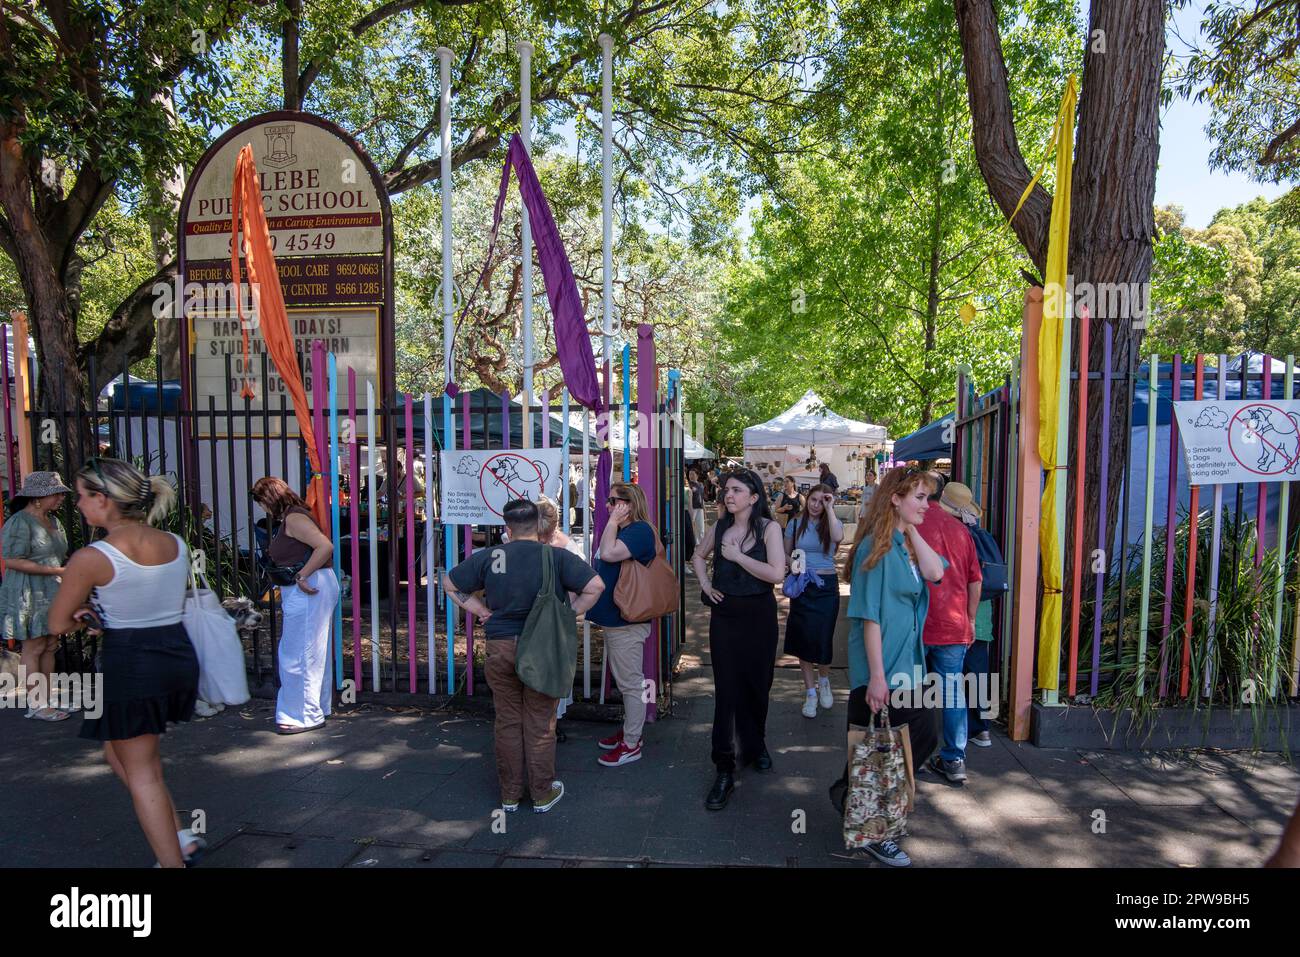 People at the entrance to Glebe Public School and the long-running weekend Glebe Markets at Glebe in Sydney Australia. Stock Photo